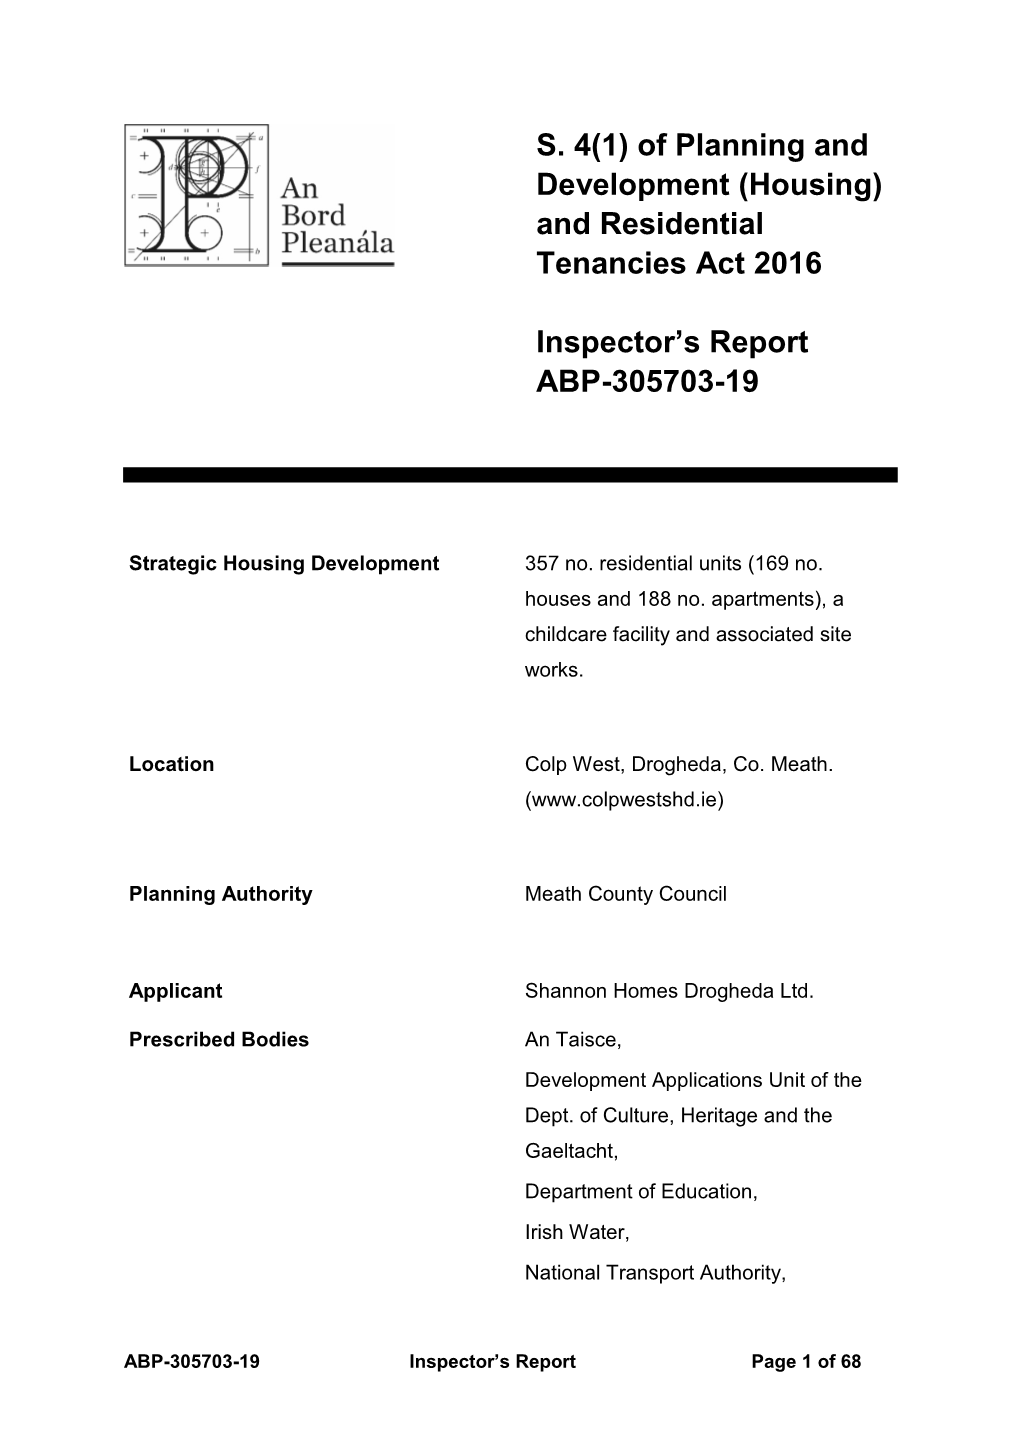 And Residential Tenancies Act 2016 Inspector's Report ABP-305703-19